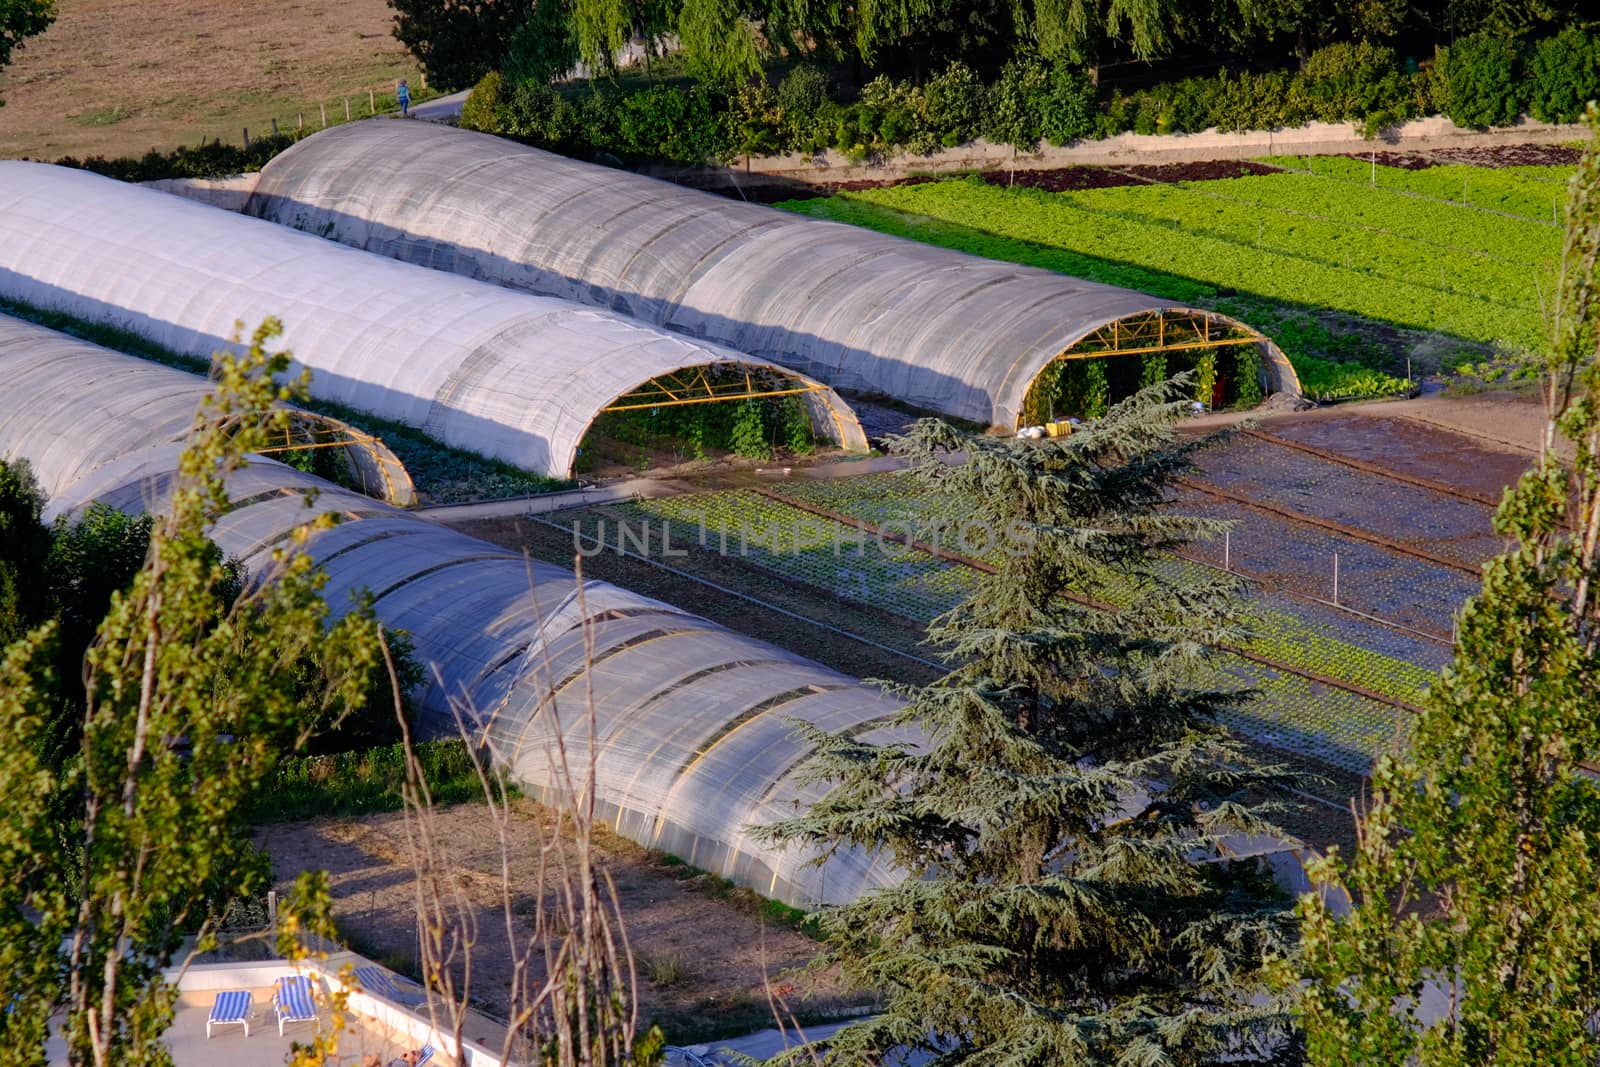 Greenhouses and other green farmlands in Pamplona, Spain